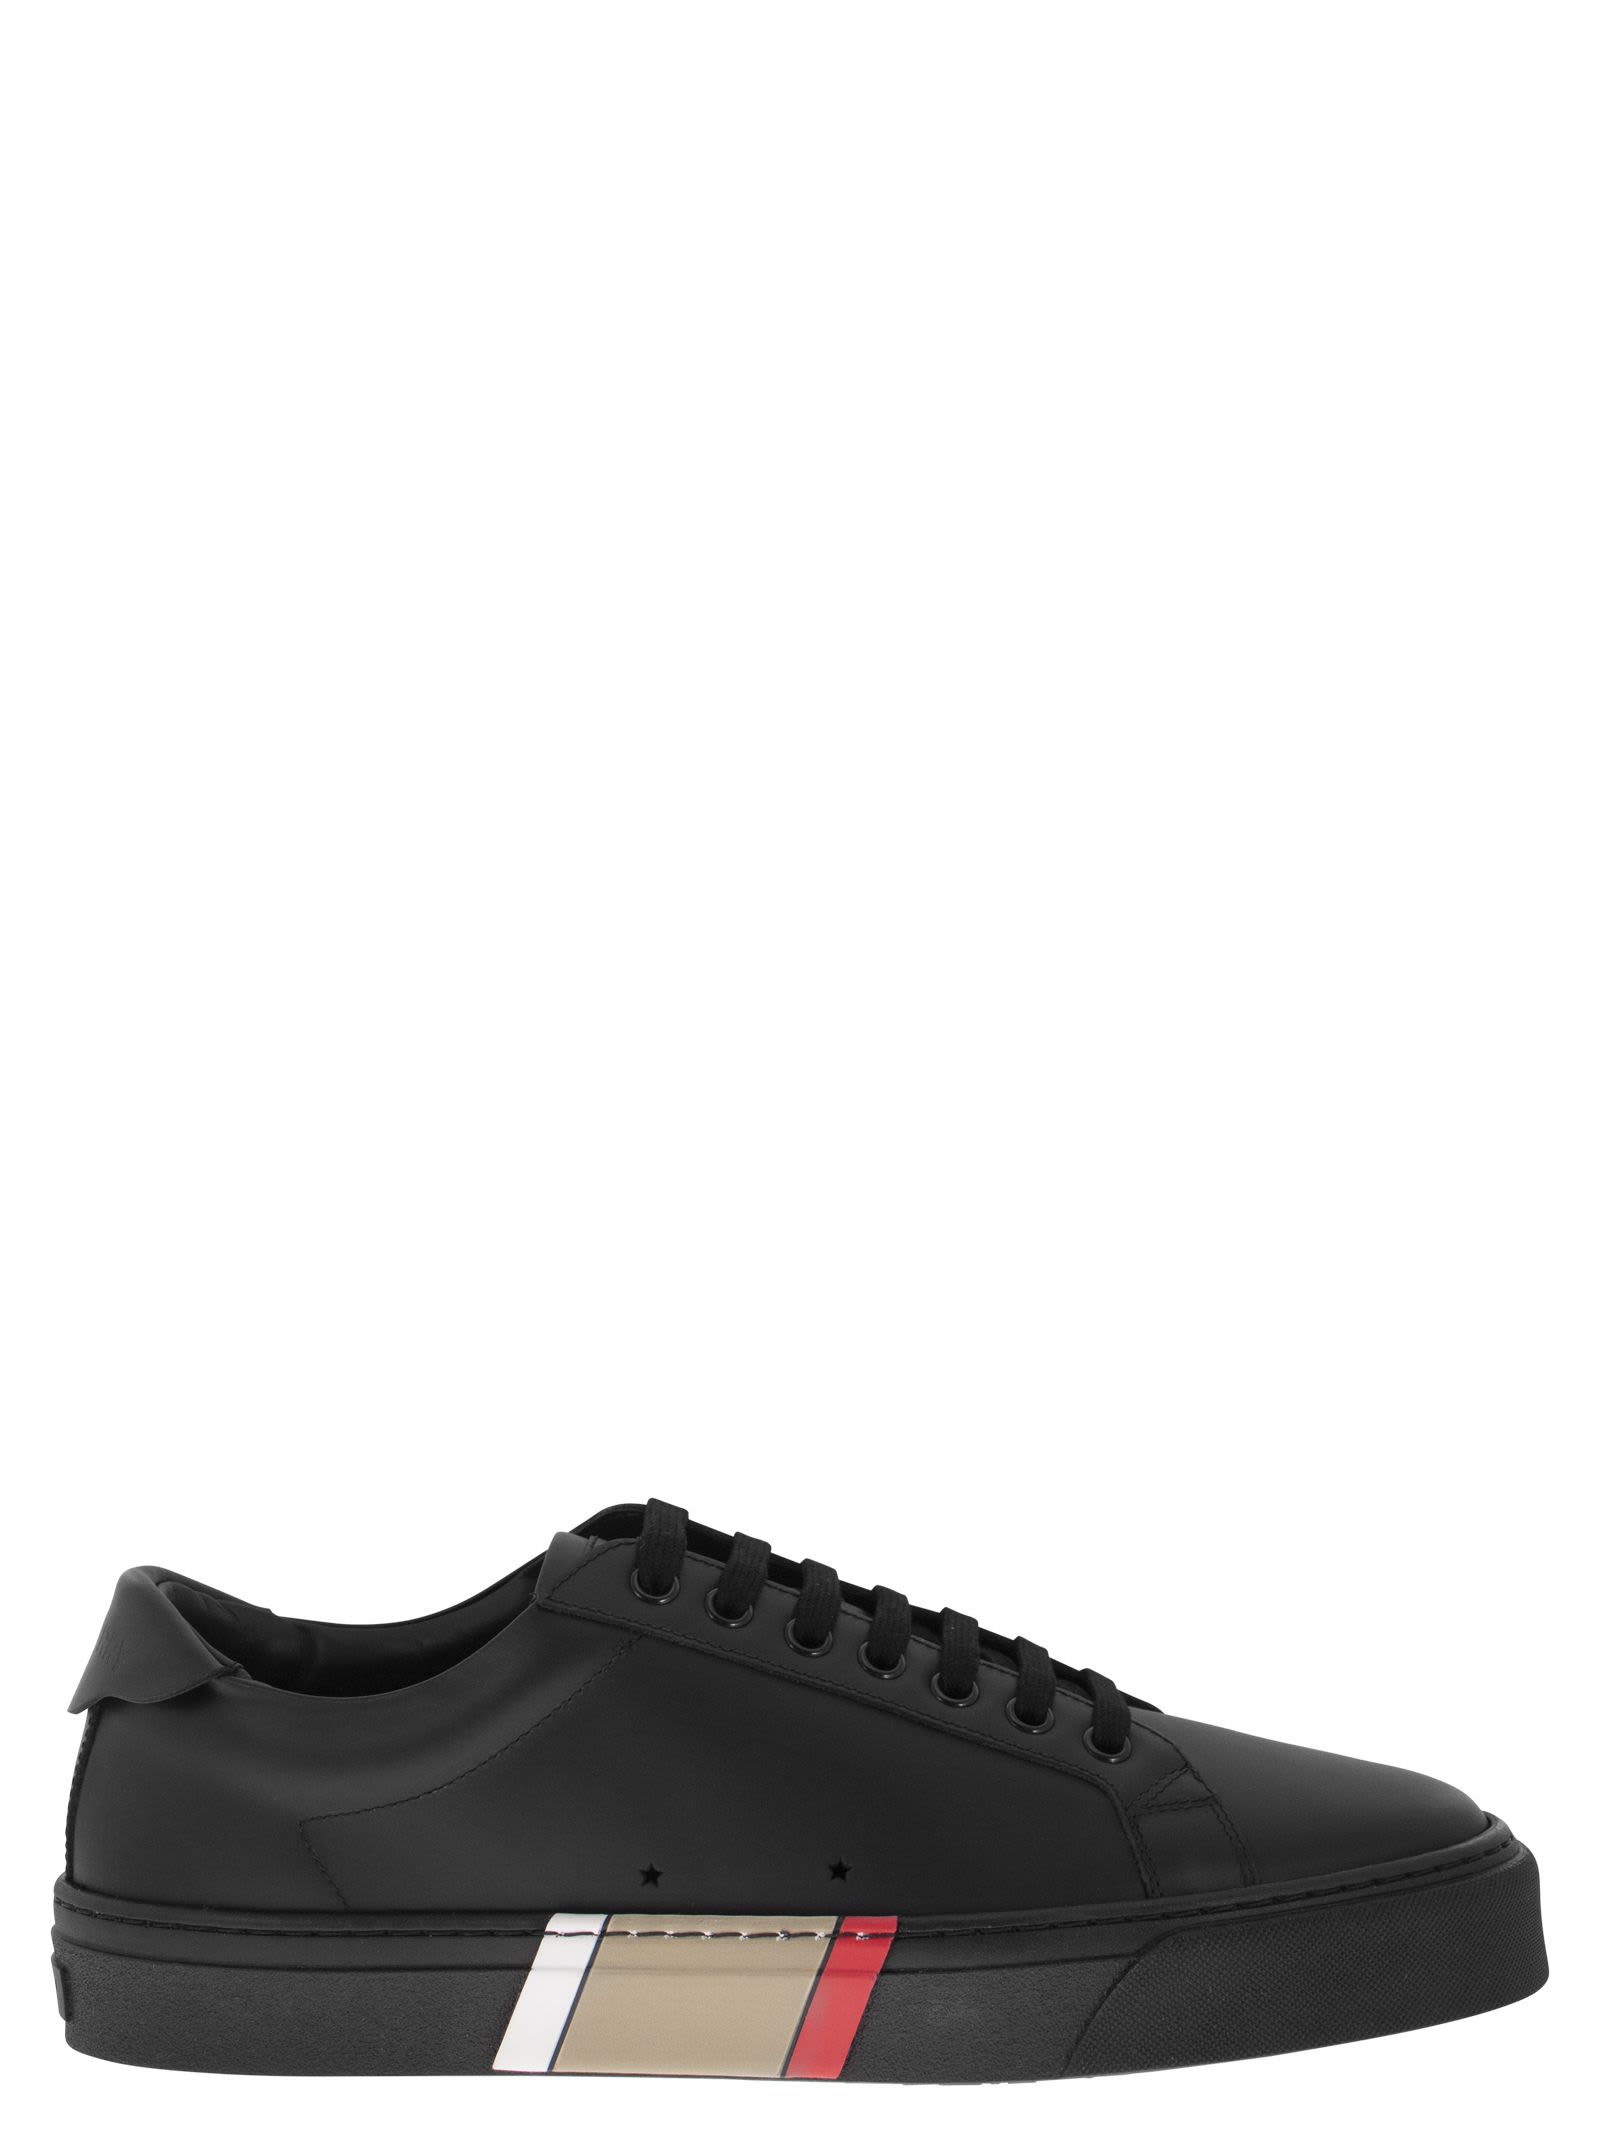 Burberry Rangleton - Leather Sneaker With Organic Sole